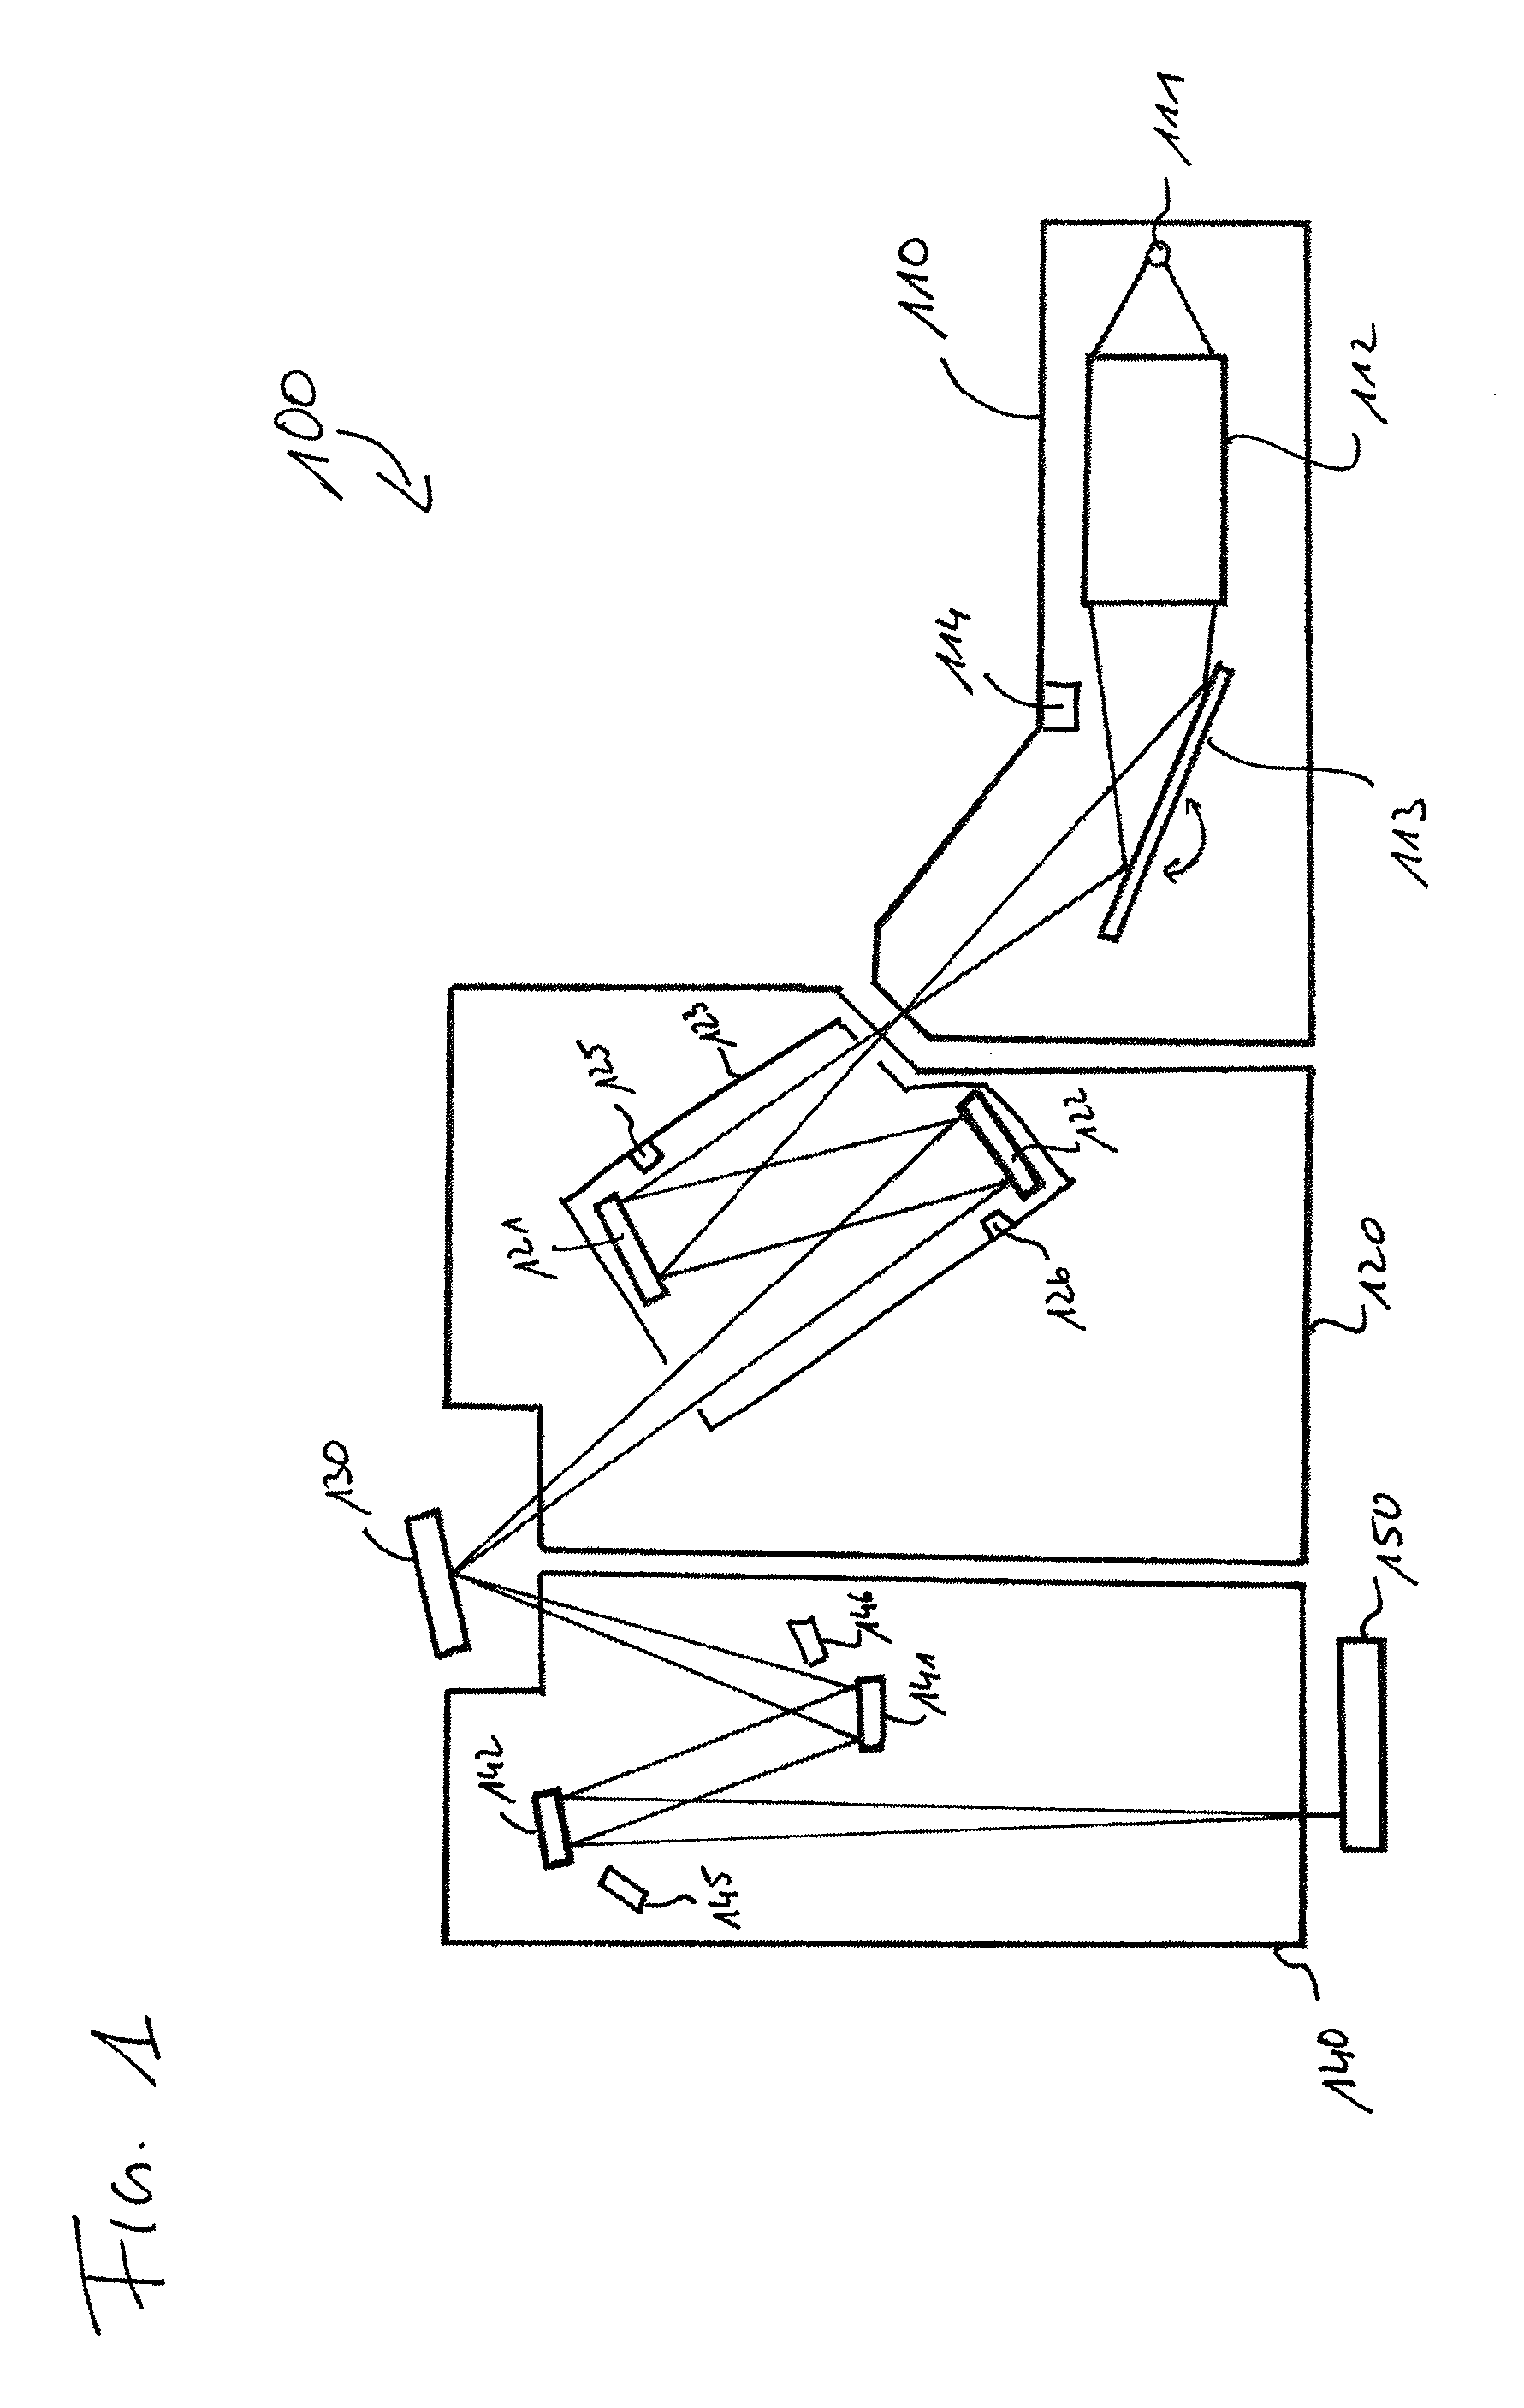 Method and system for removing contaminants from a surface